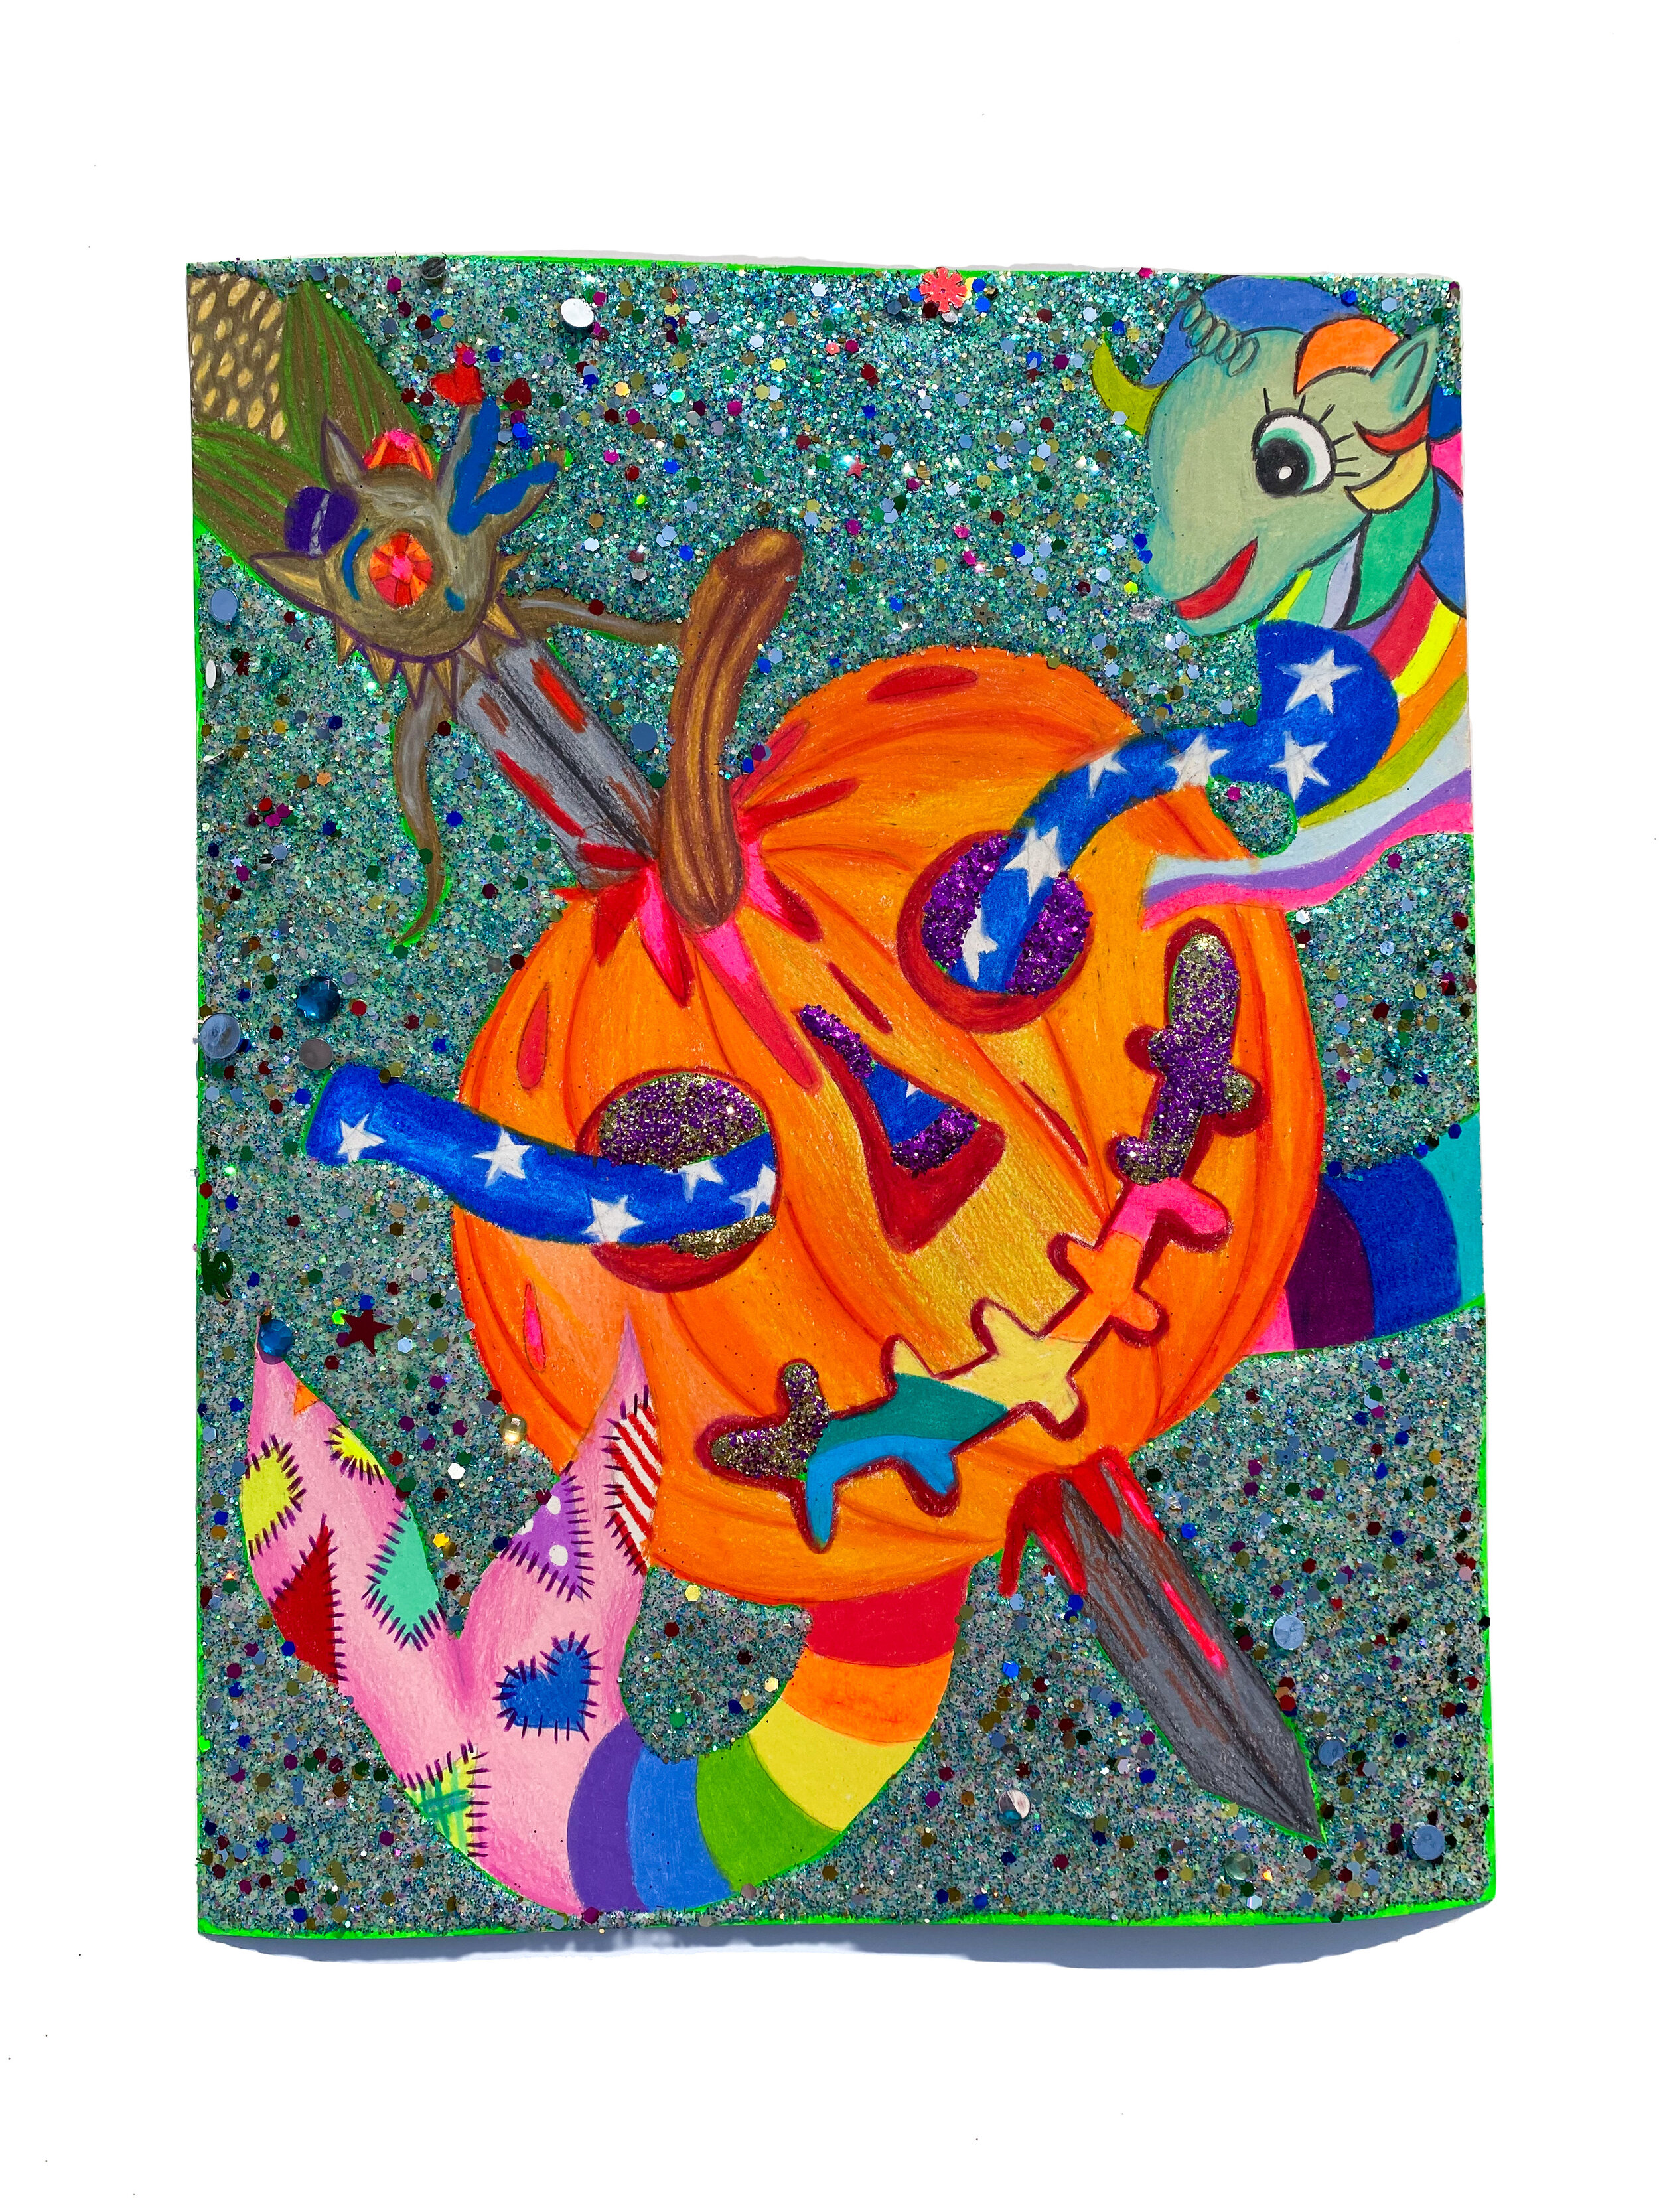   Stabbed Jack O Lantern with Ashamed Girls Pony Dolphin , 2021  14 x 11 inches (38.1 x 27.94 cm.)  Colored pencil, acrylic paint, Elmer's glue, Modge Podge, and glitter on paper  Private collection, Birmingham, MI 